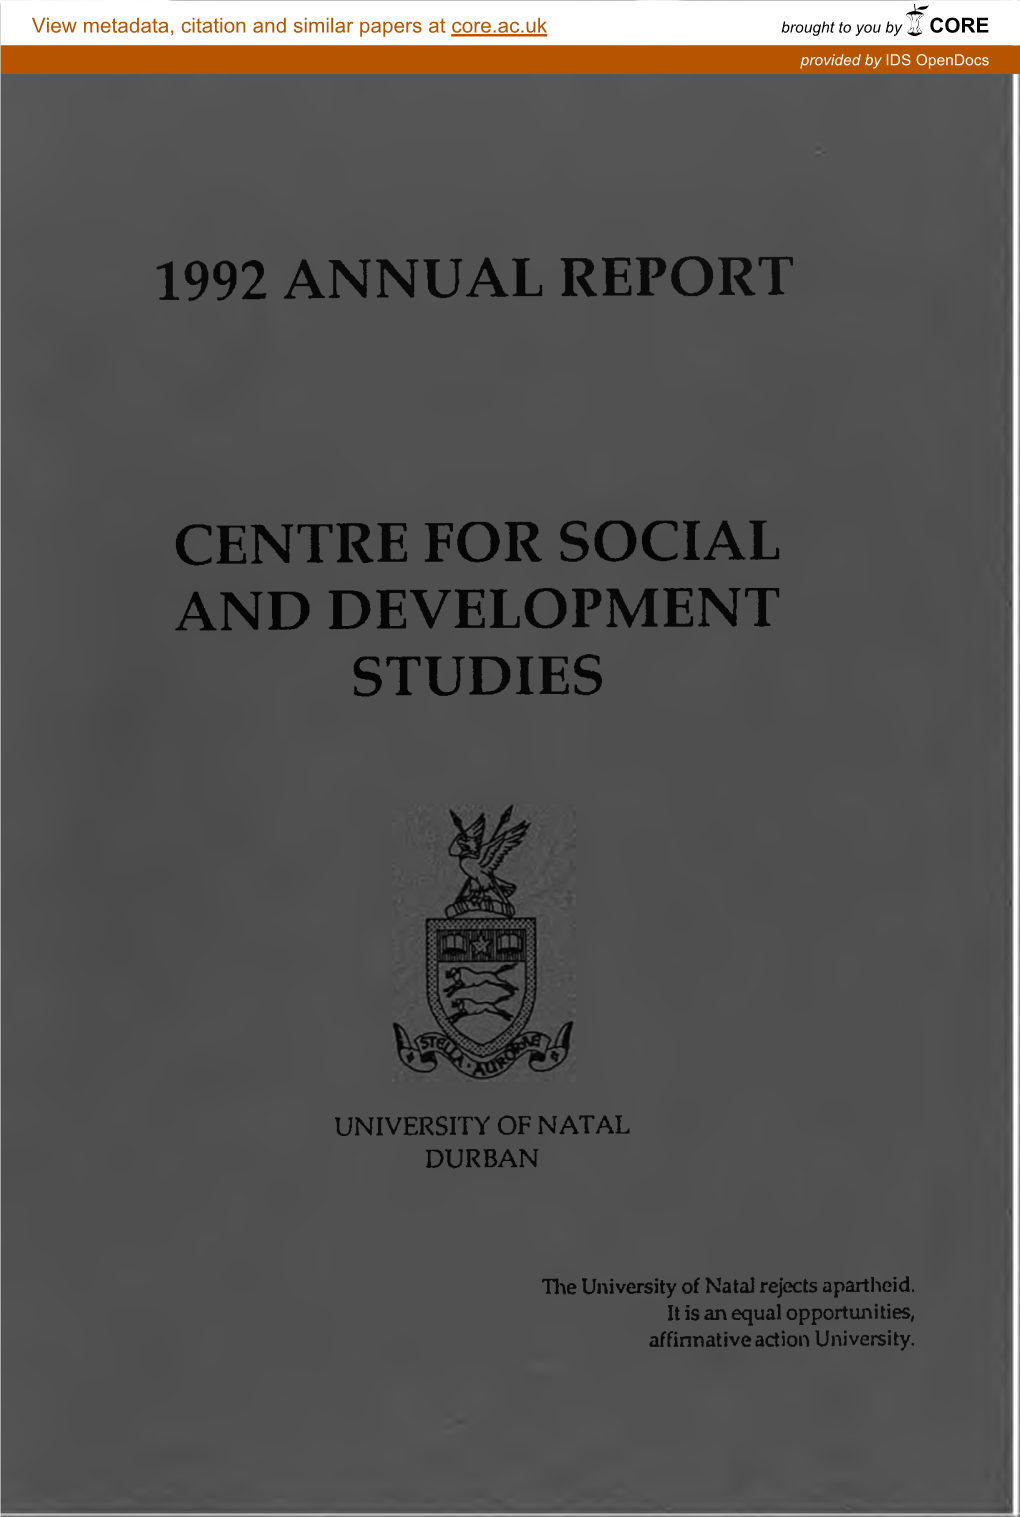 1992 Annual Report Centre for Social and Development